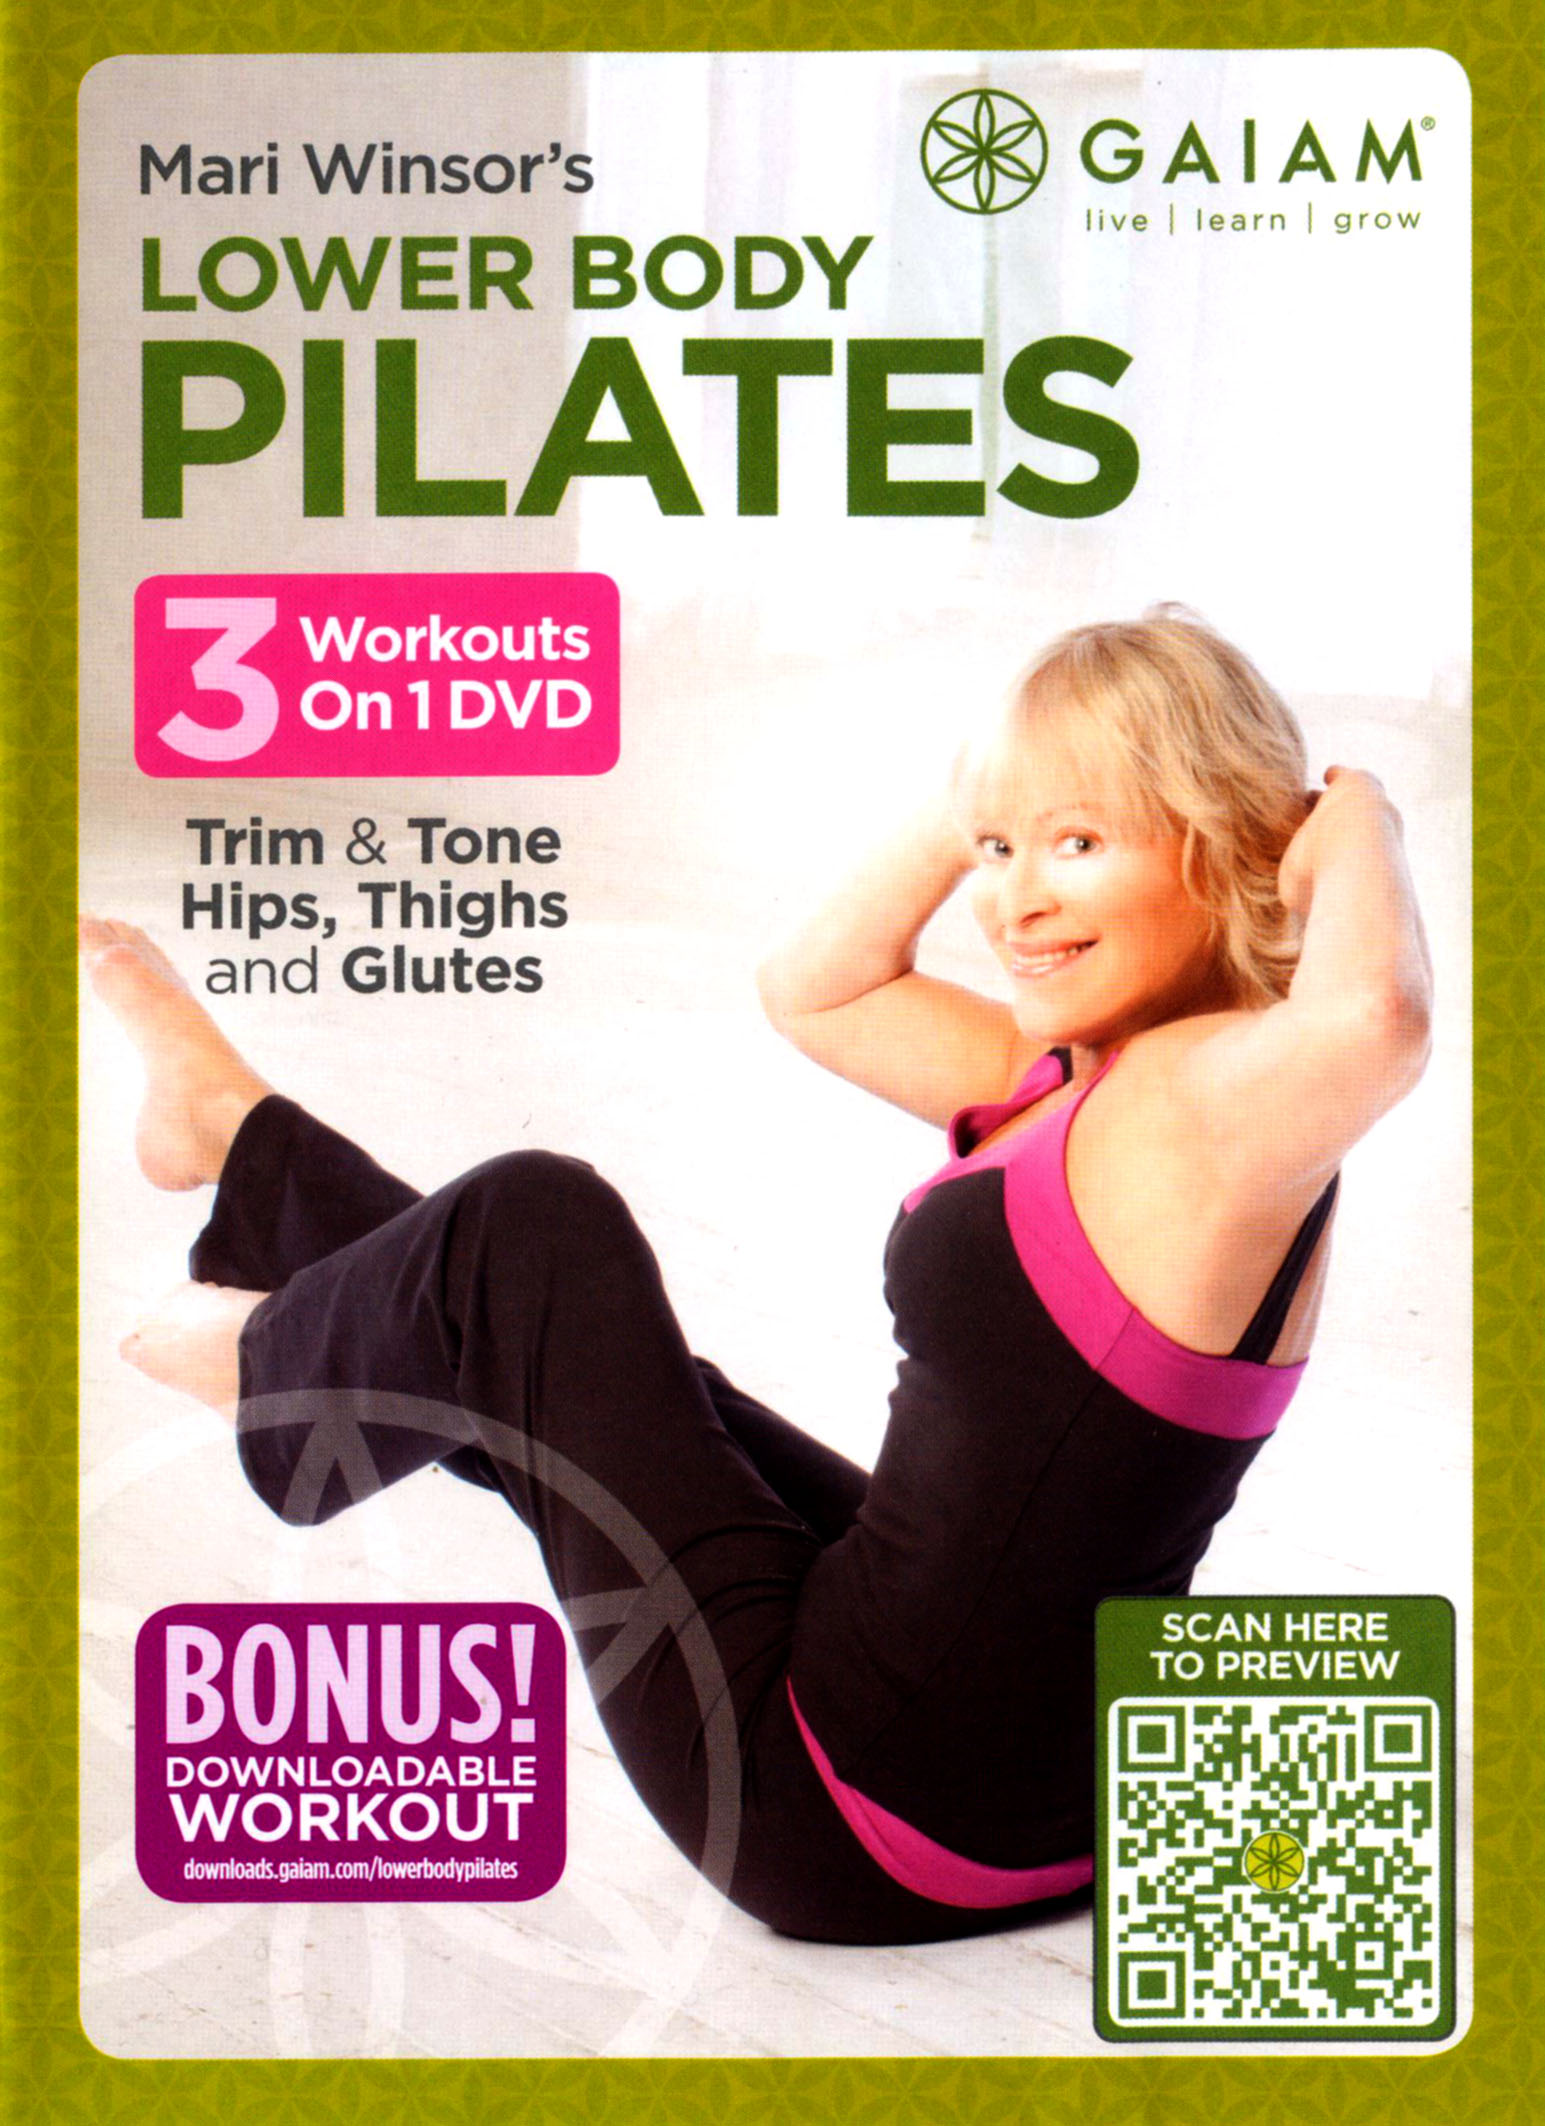 GAIAM PILATES DVDS Boxed Set of 3 Workouts Powerhouse Collection